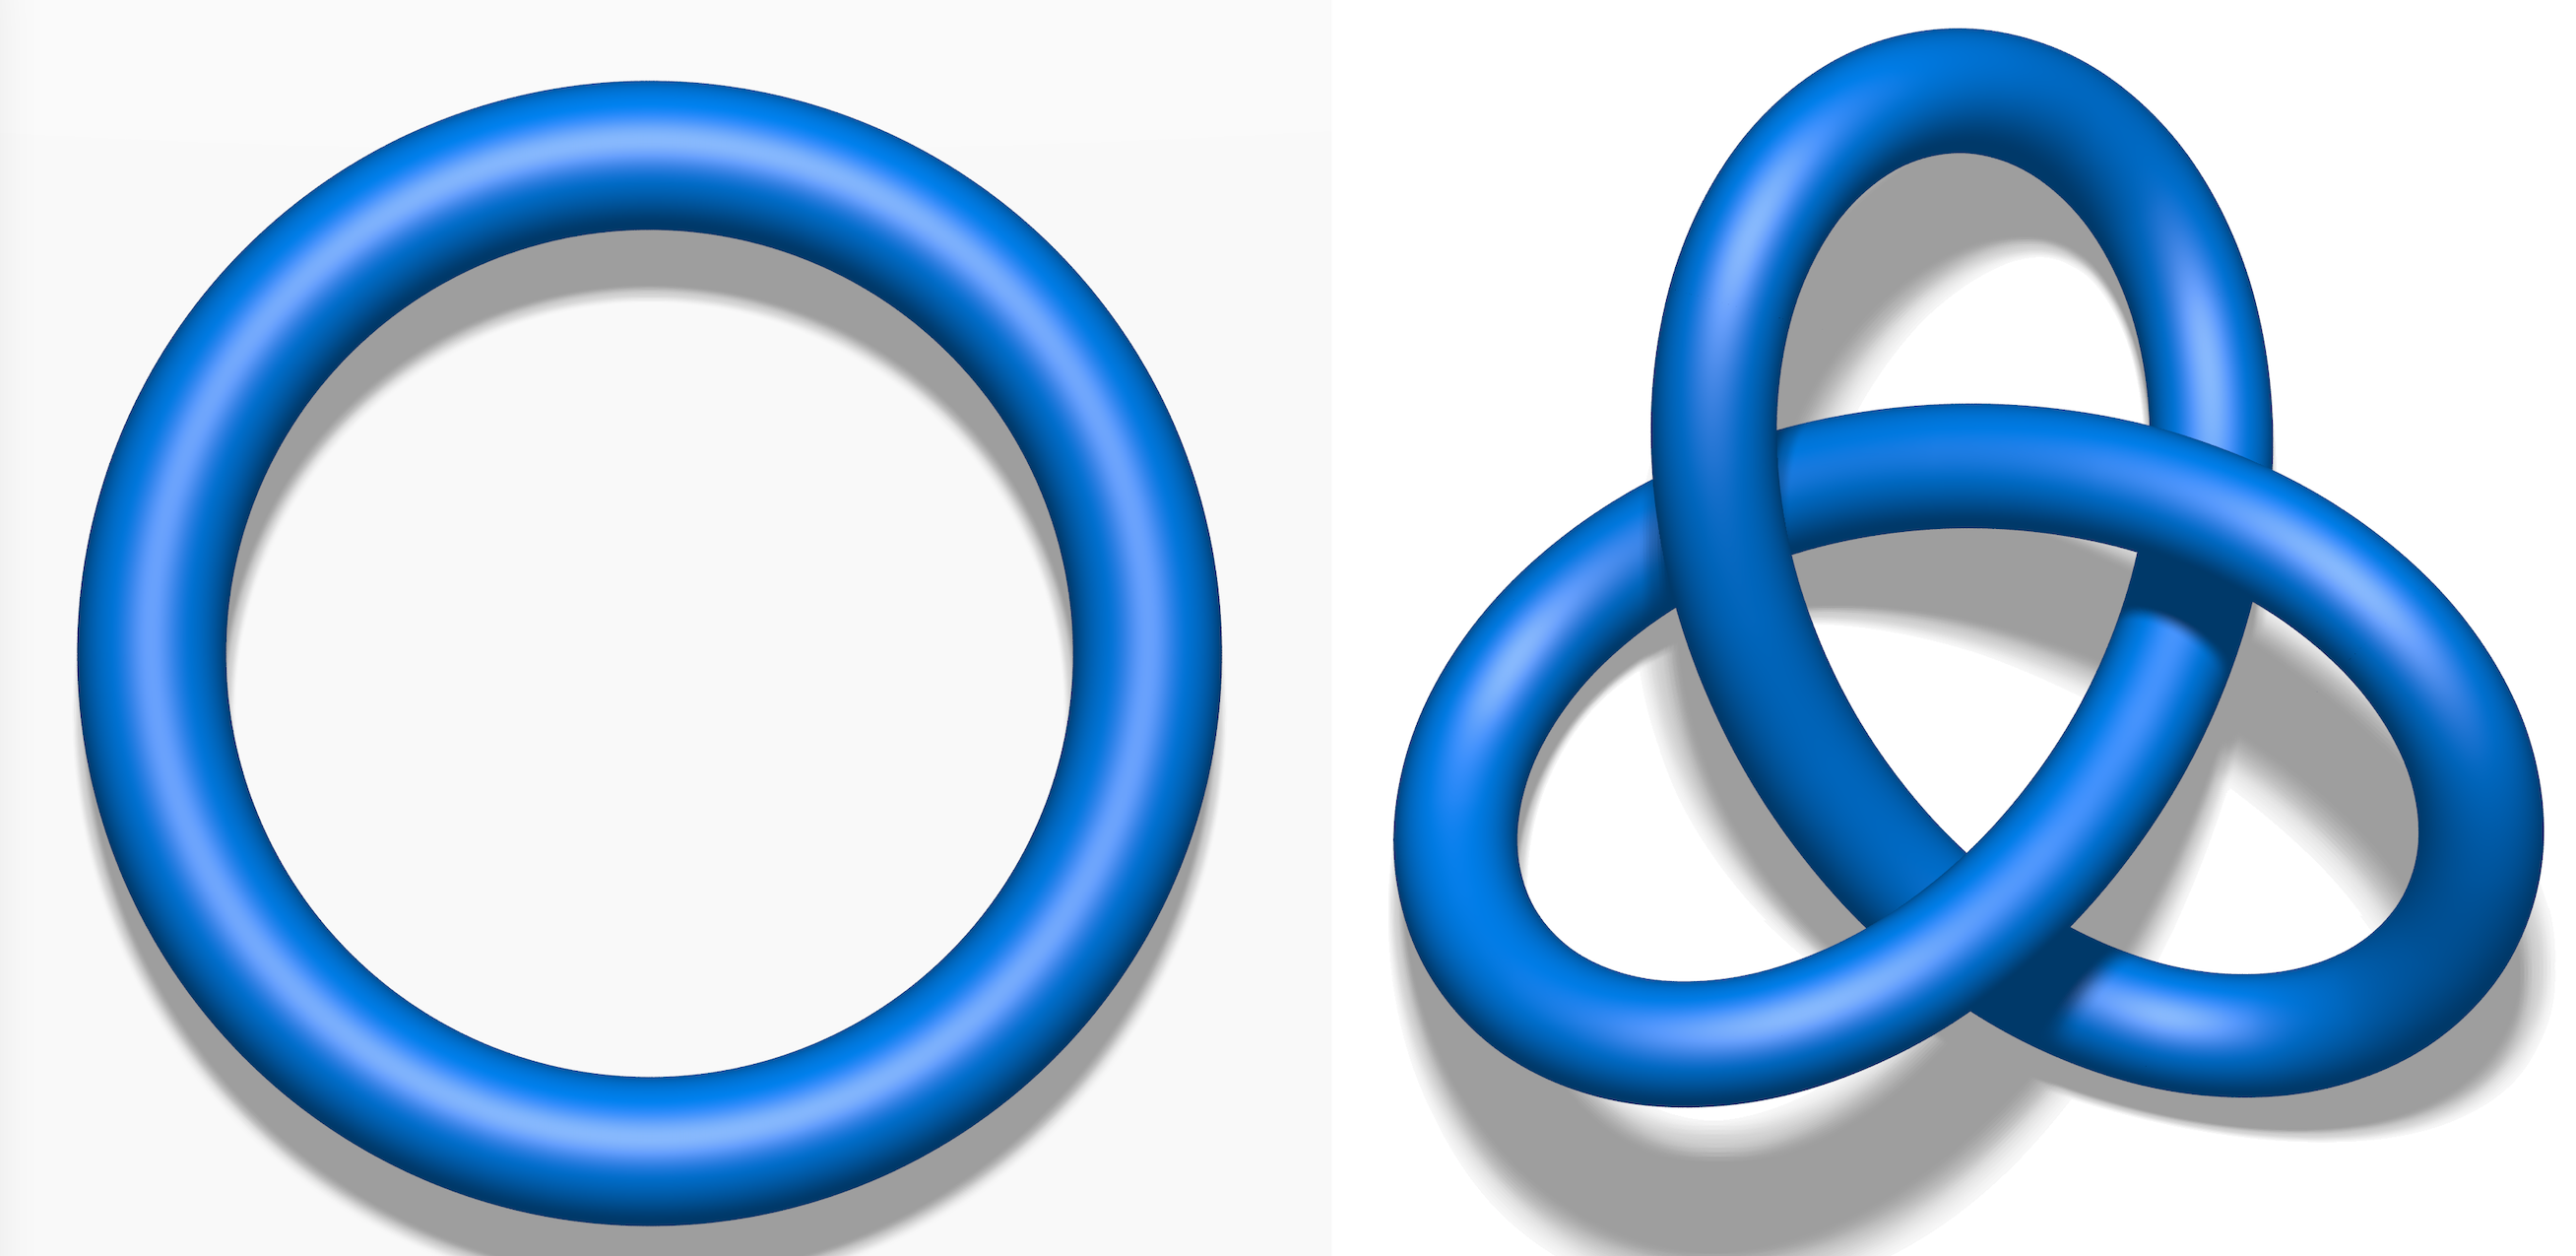 An unknot, a circle with no crossovers, on the left, compared with a simple trefoil knot, with three crossovers